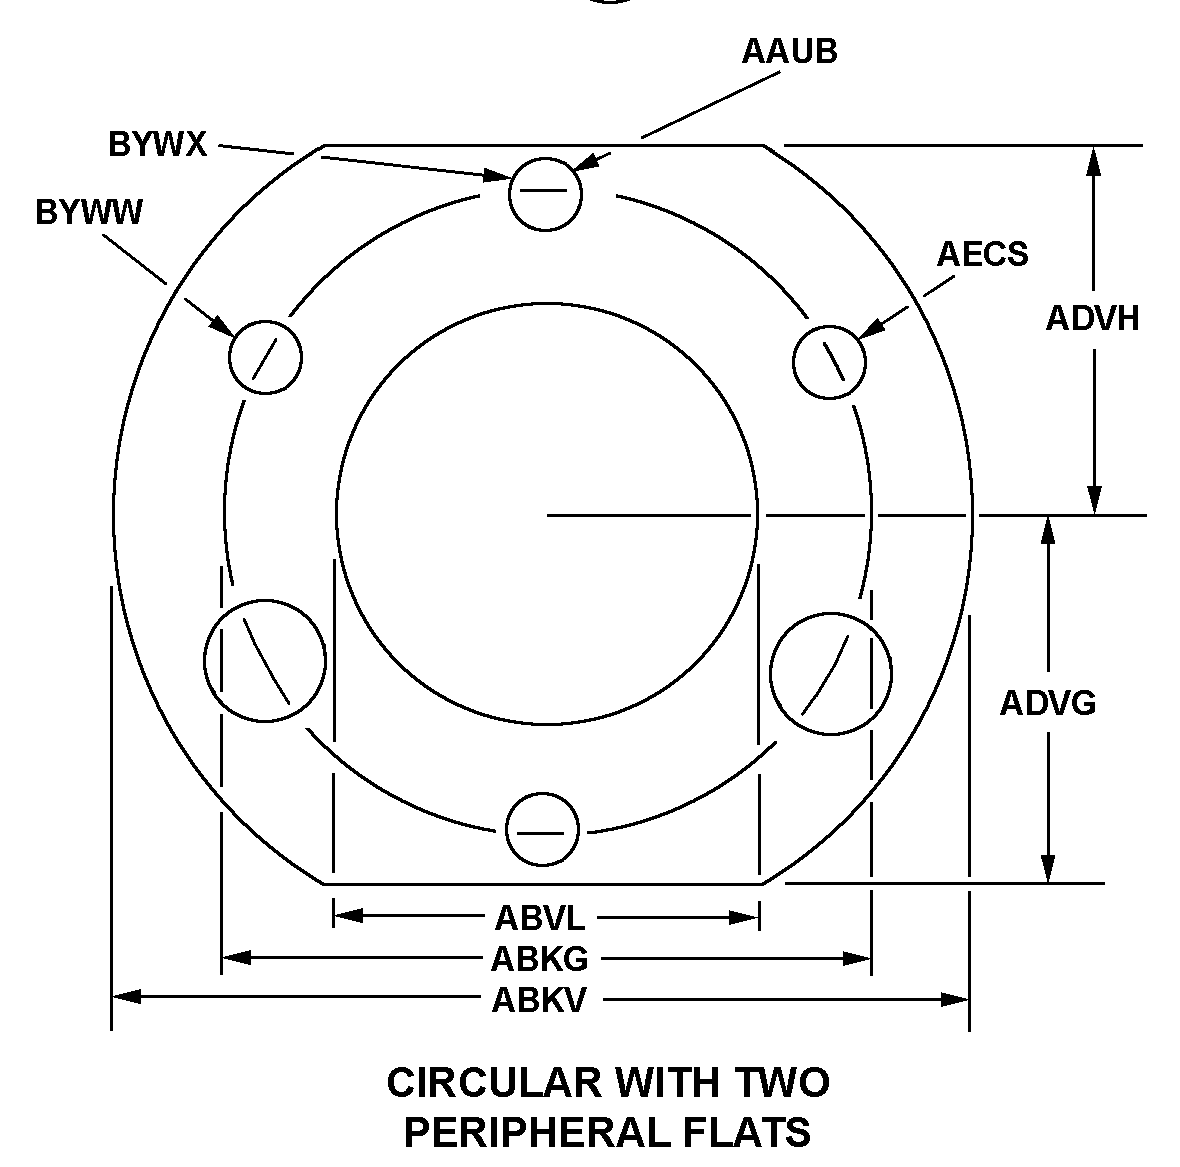 CIRCULAR WITH TWO PERIPHERAL FLATS style nsn 5330-01-472-7682